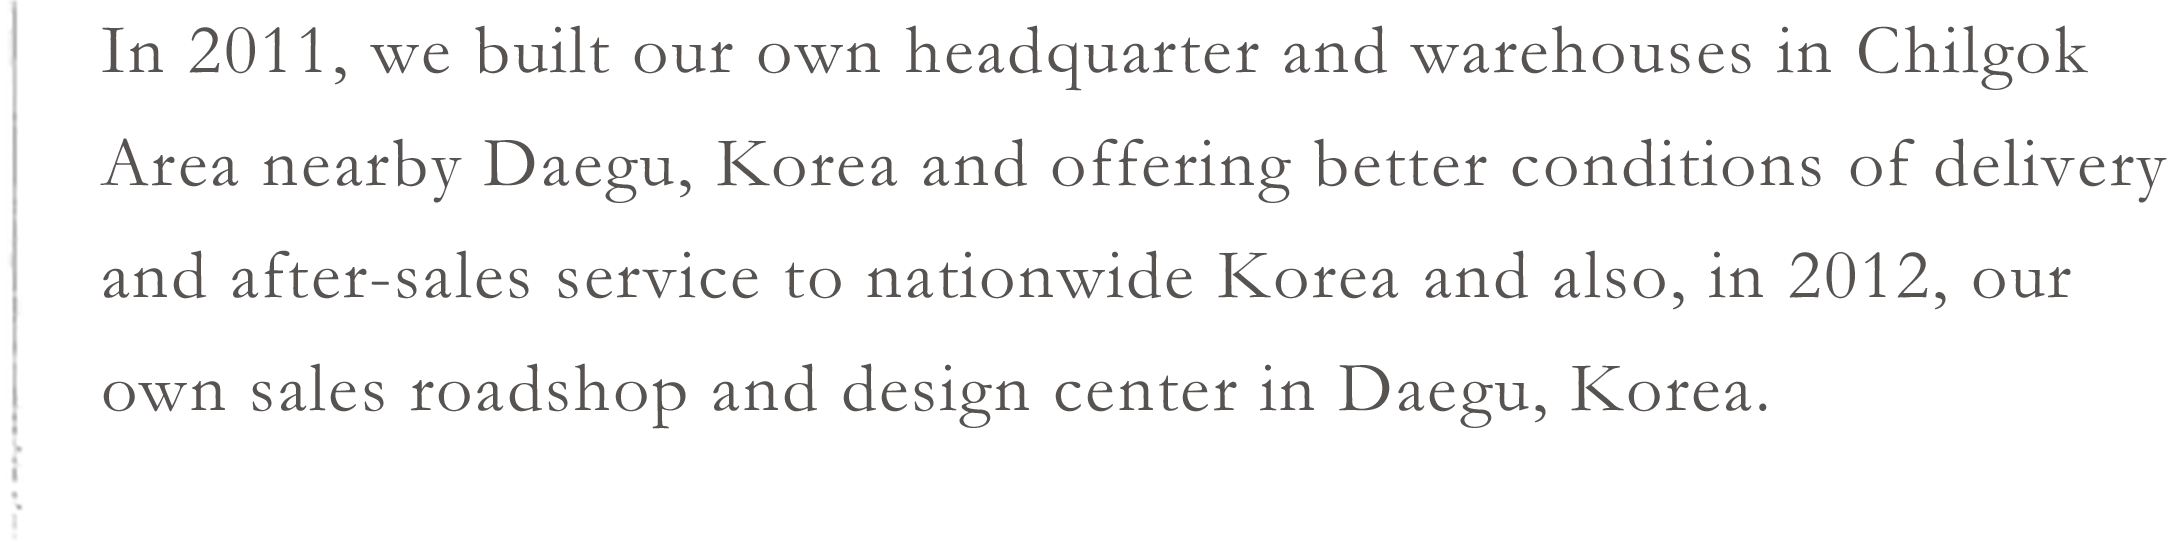 In 2011, we built our own headquarter and warehouses in Chilgok Area nearby Daegu, Korea and offering better conditions of delivery and after-sales service to nationwide Korea and also, in 2012, our own sales roadshop and design center in Daegu, Korea.